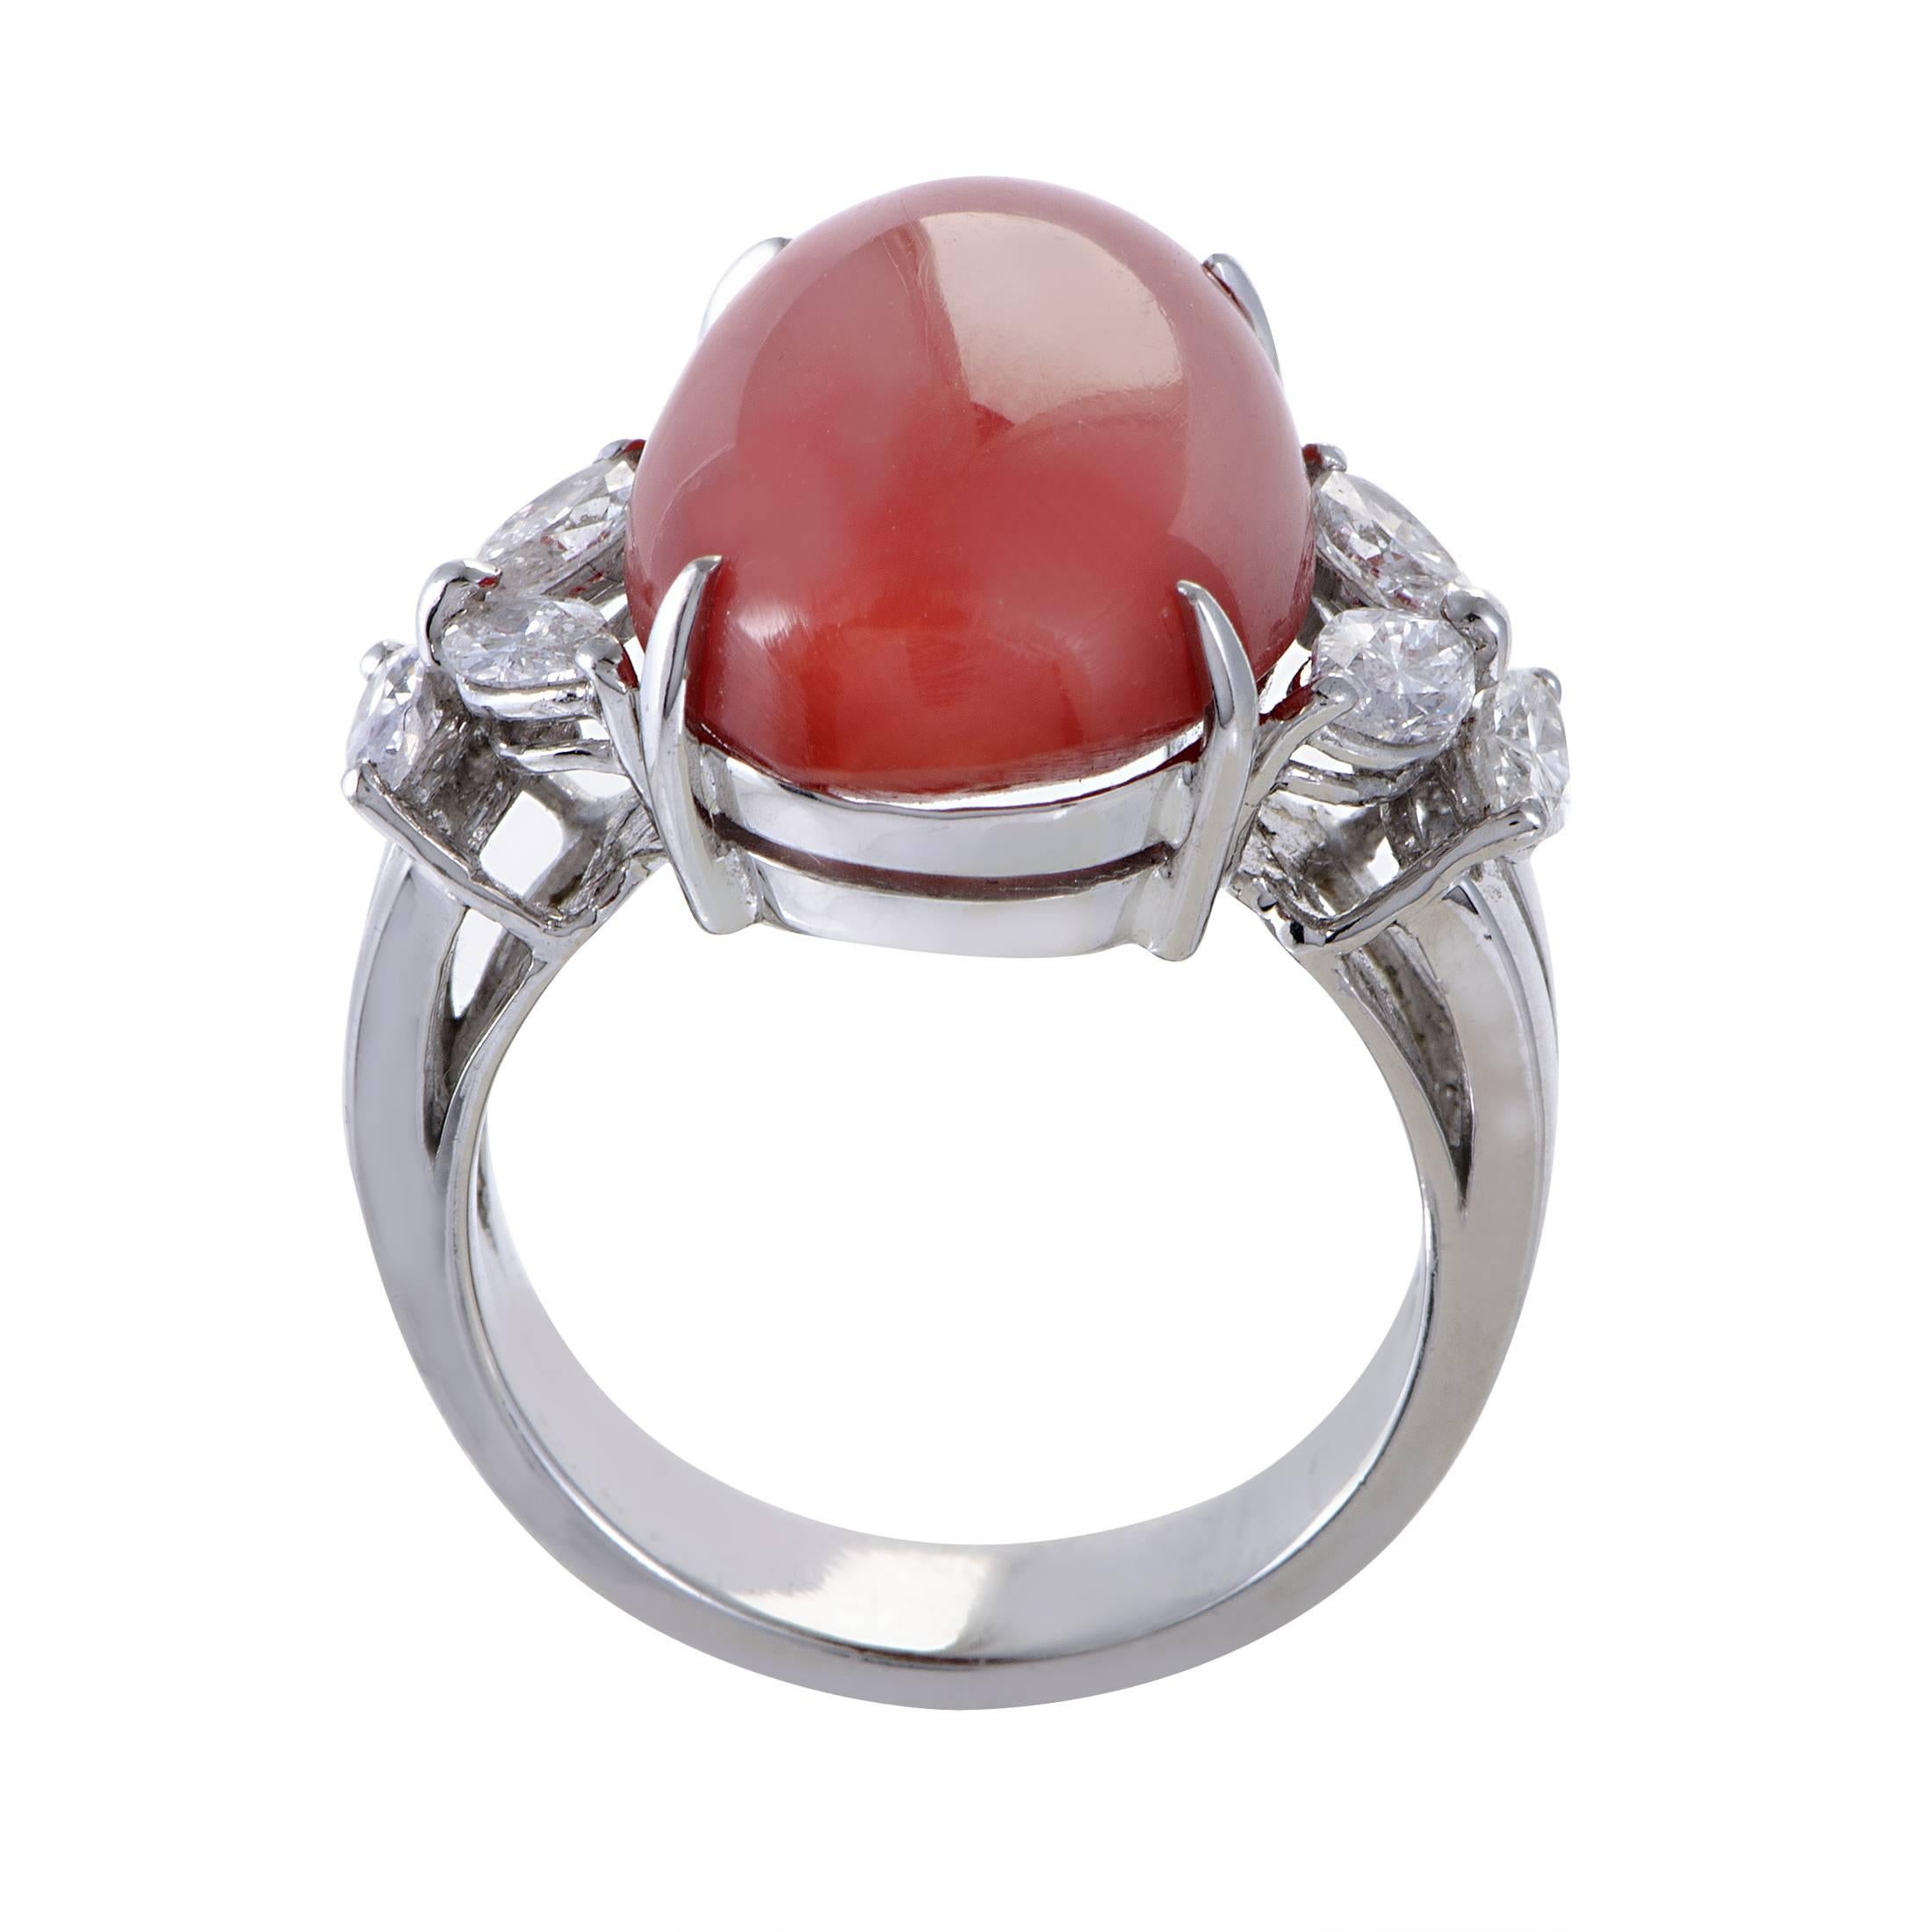 Complemented with lustrous diamonds weighing in total 1.00 carat which also perfectly match the prestigious gleam of the platinum body, the astonishing coral stone creates a fantastic sight with its passionate color and smooth shape in this